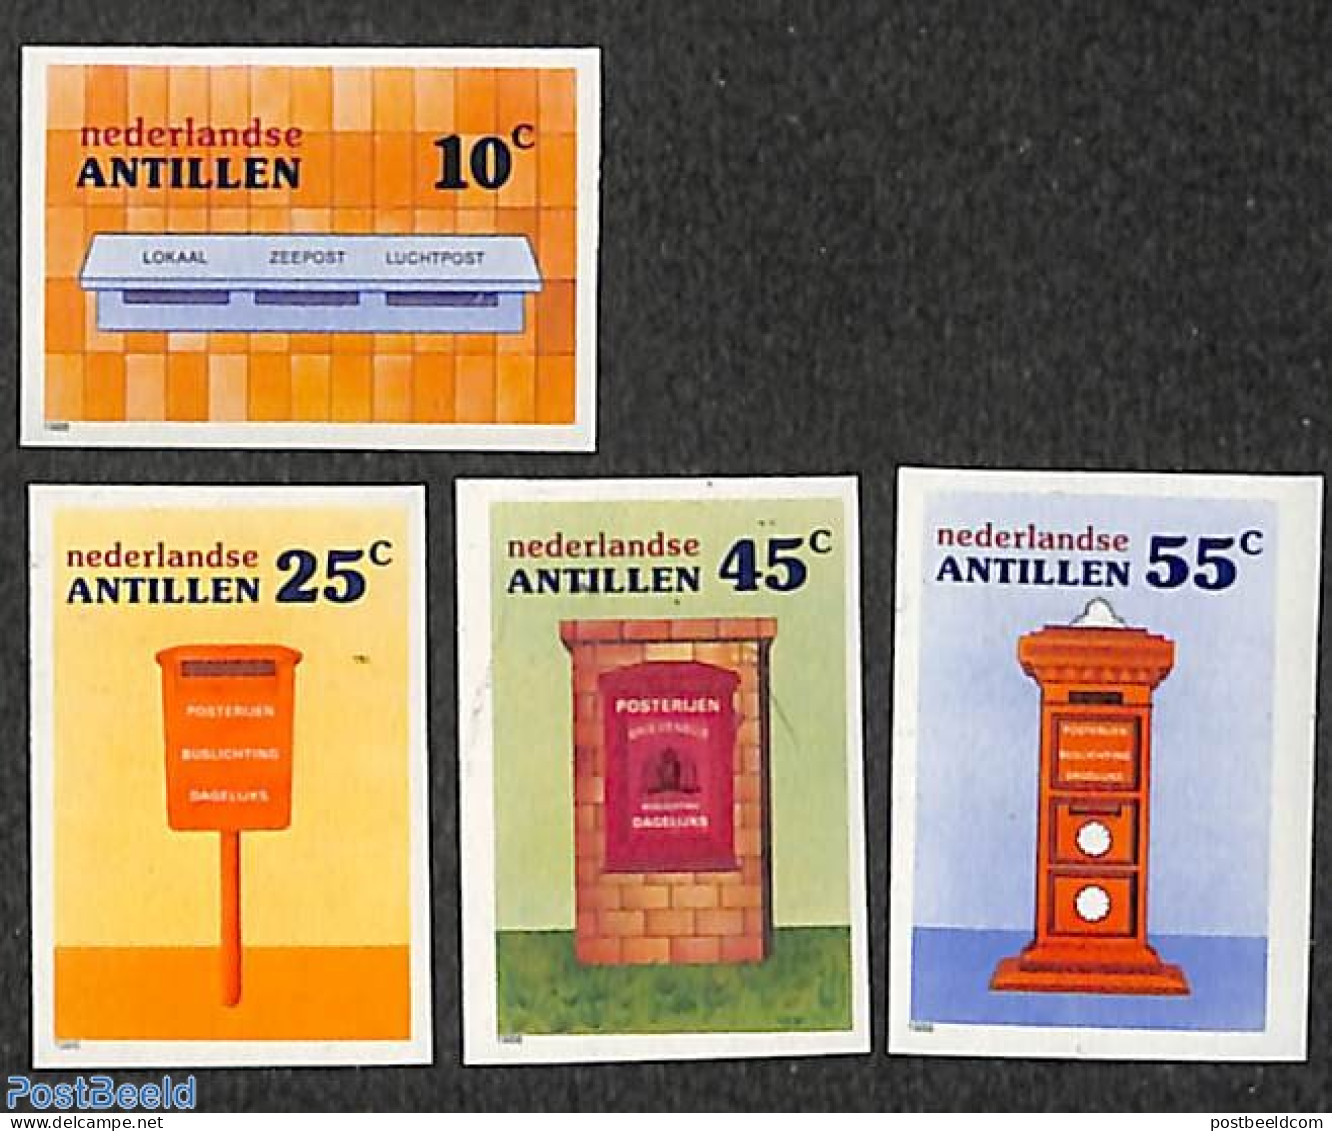 Netherlands Antilles 1986 Mail Boxes 4v, Imperforated, Mint NH, Mail Boxes - Post - Correo Postal